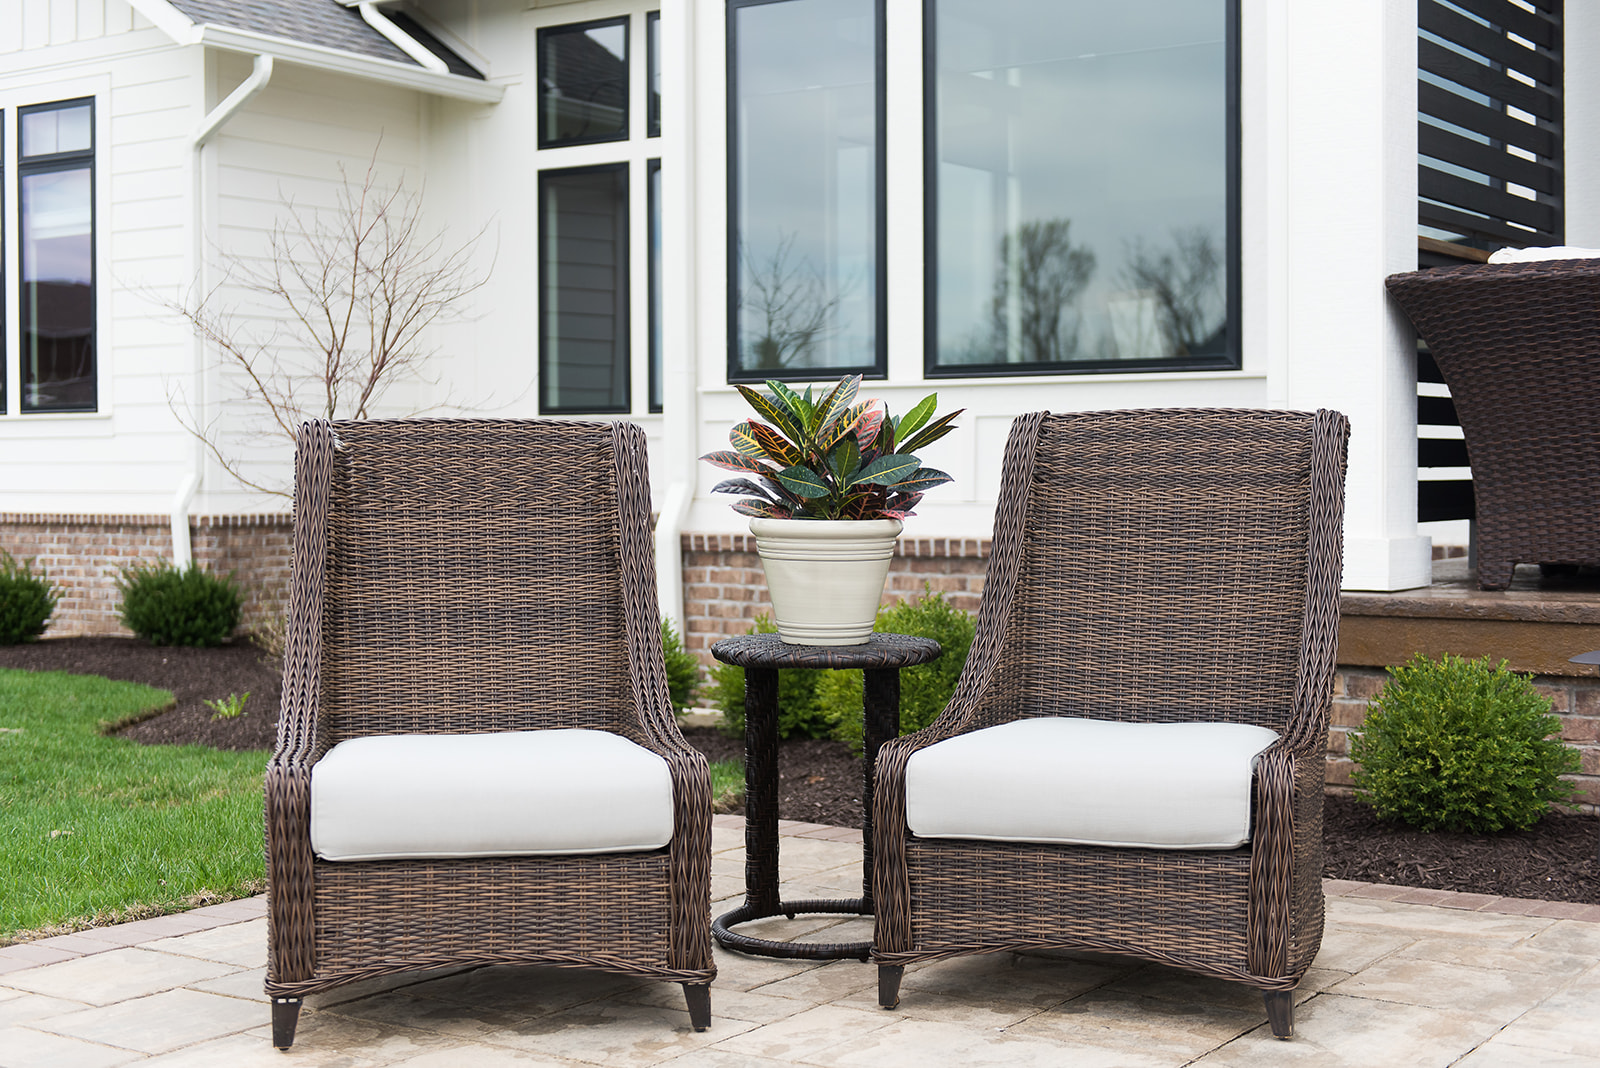 Selecting Outdoor Furniture